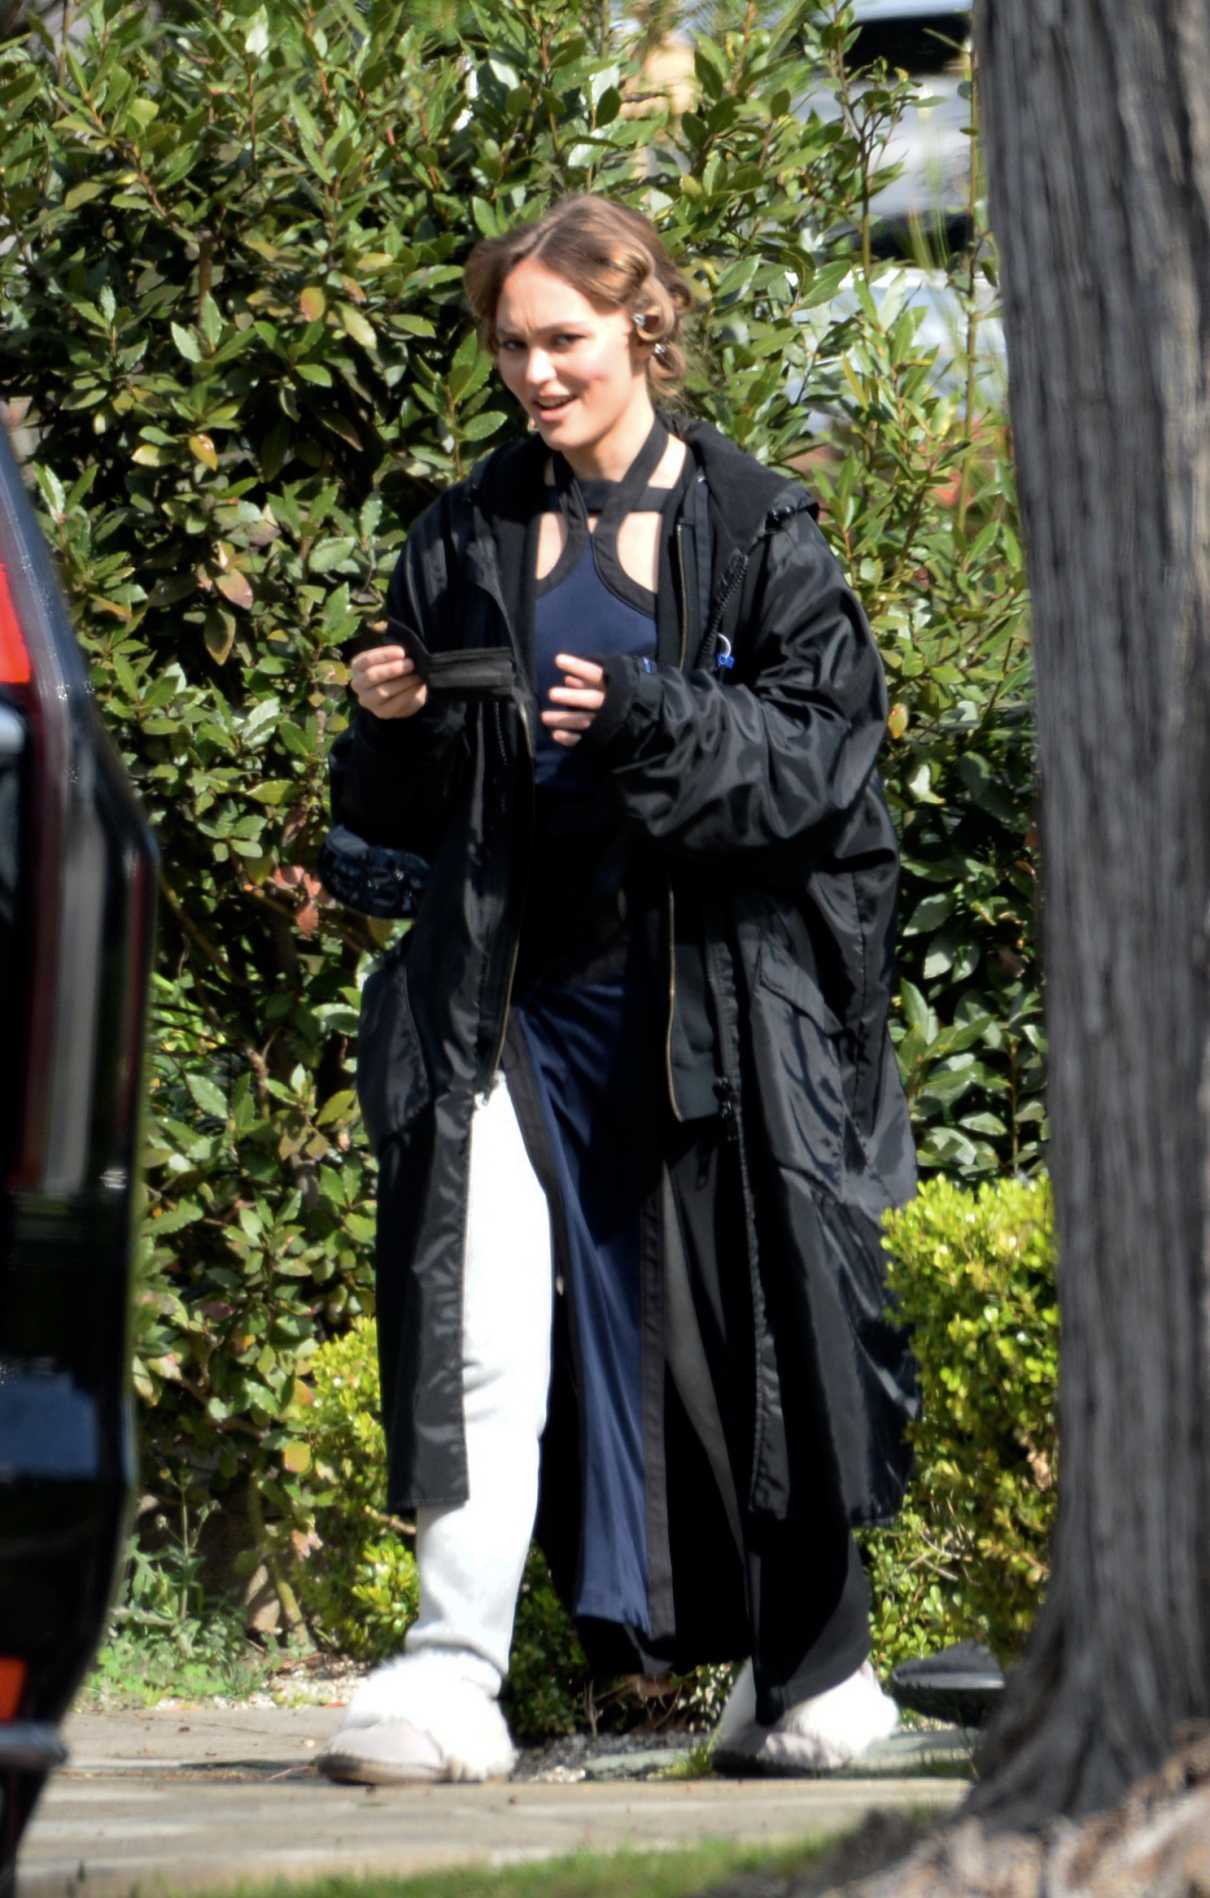 Lily-Rose Depp in a Black Outfit